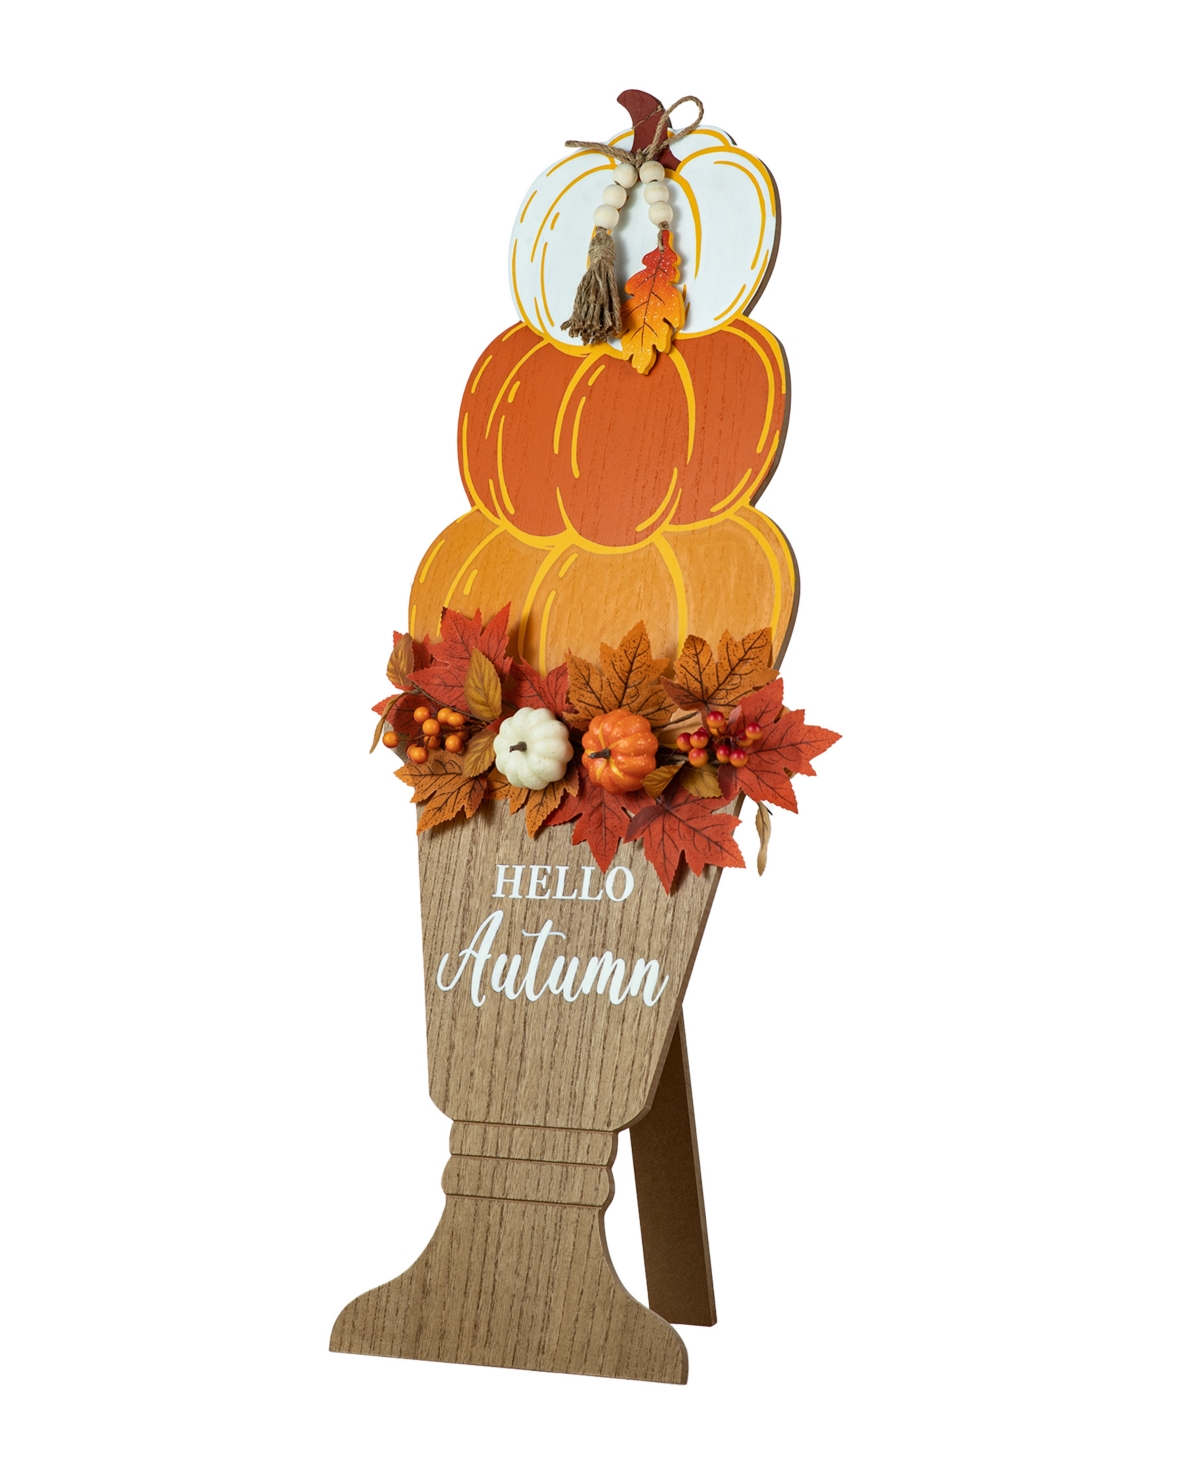 36"H Fall Wooden Stacked Pumpkin with Urn Porch Decor - Multi